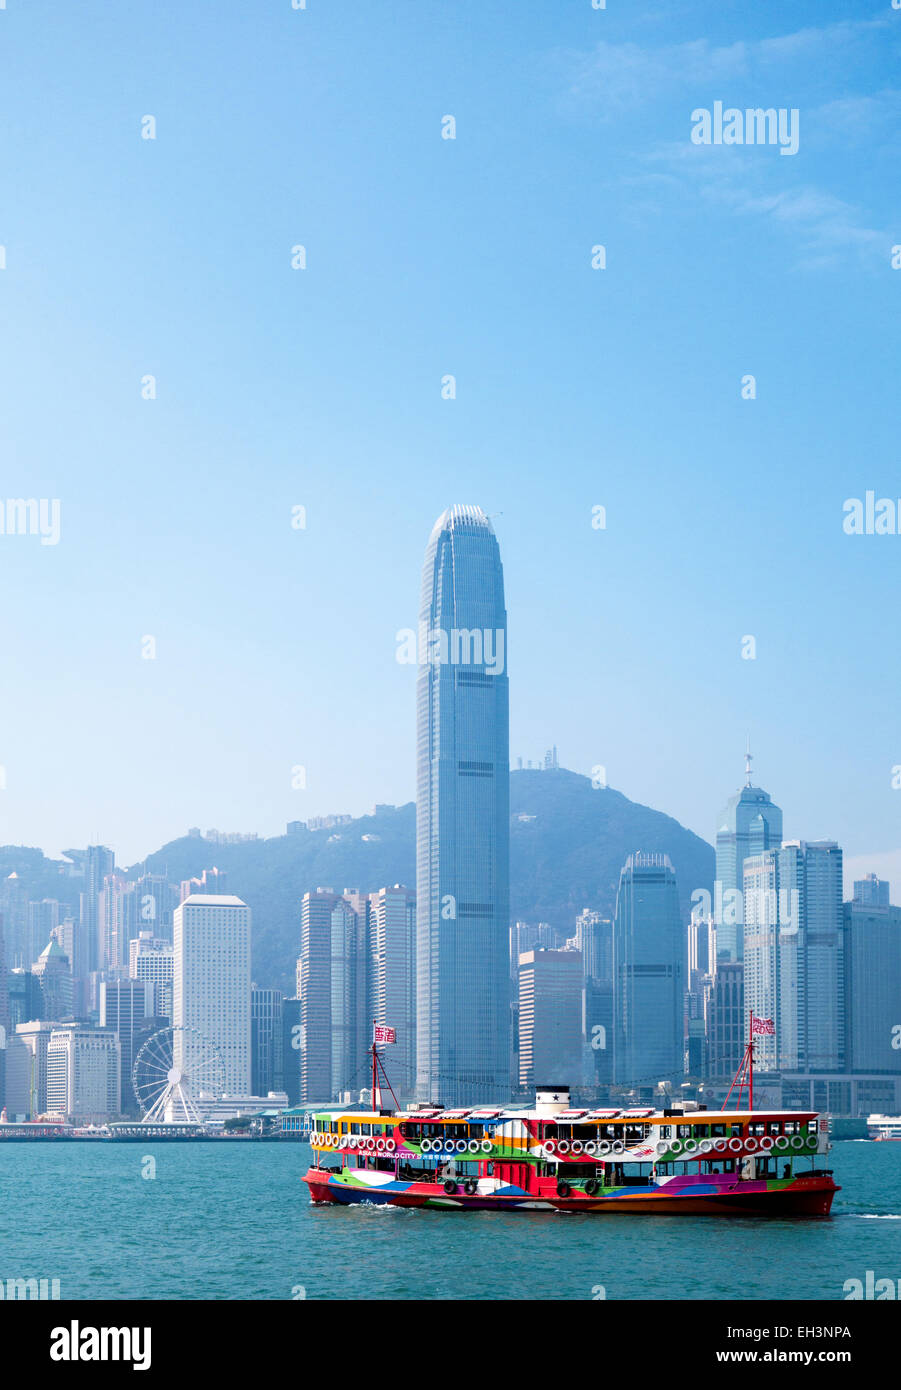 A ferry in Hong Kong harbour with the city skyline in the background Stock Photo